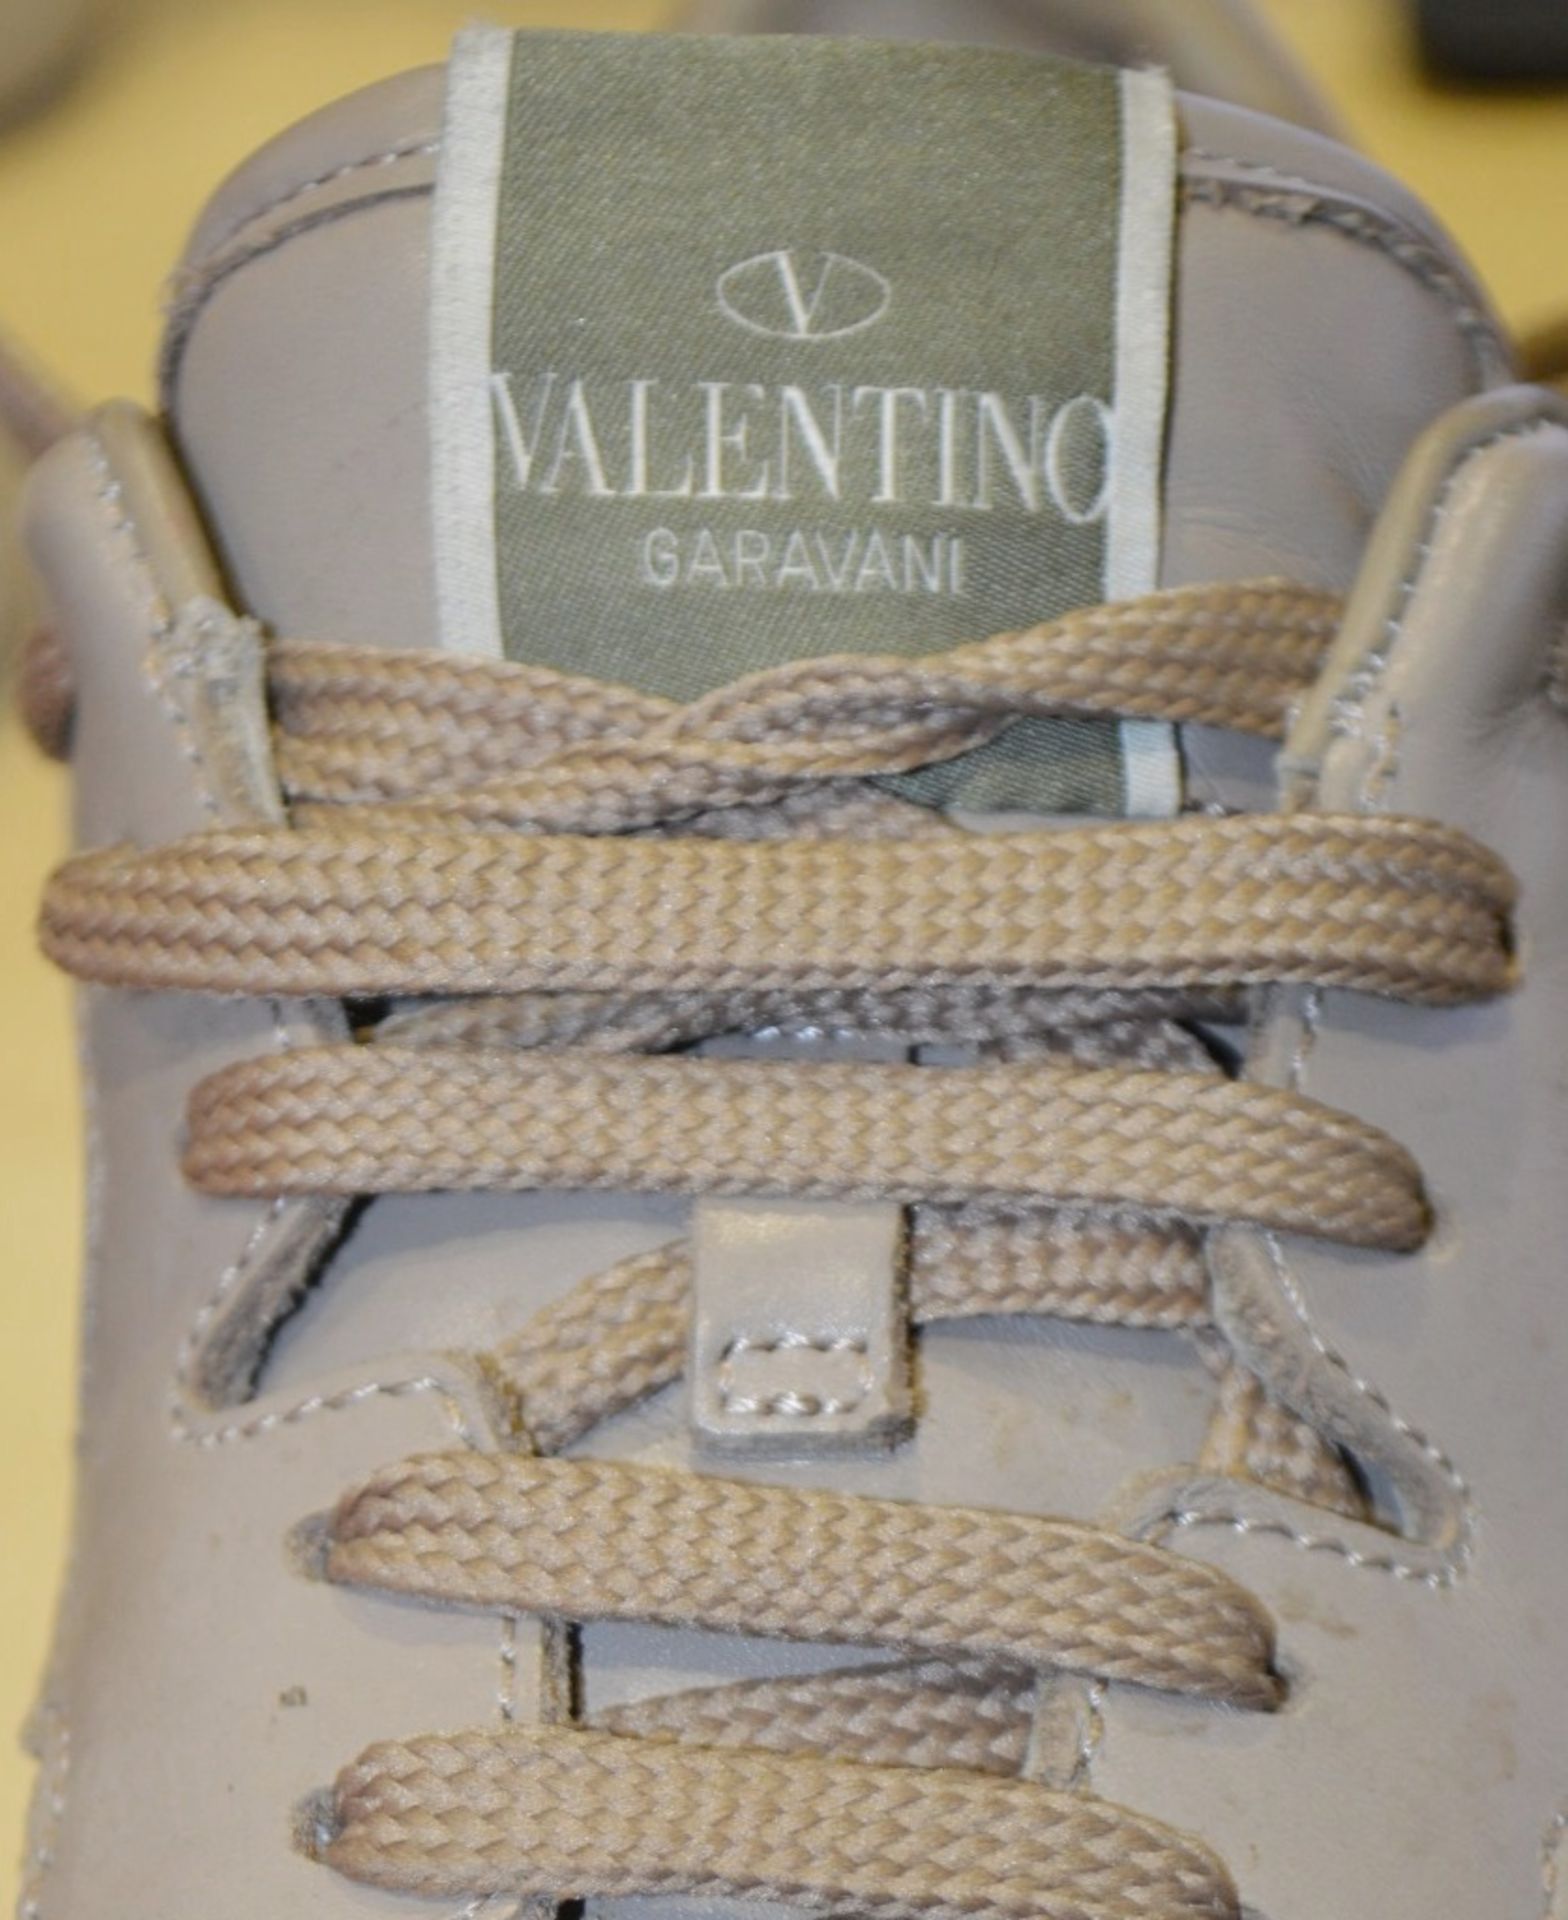 1 x Pair Of Men's Genuine Valentino Trainers In Beige - Size: 42 - Preowned In Very Good Condition - - Image 6 of 7